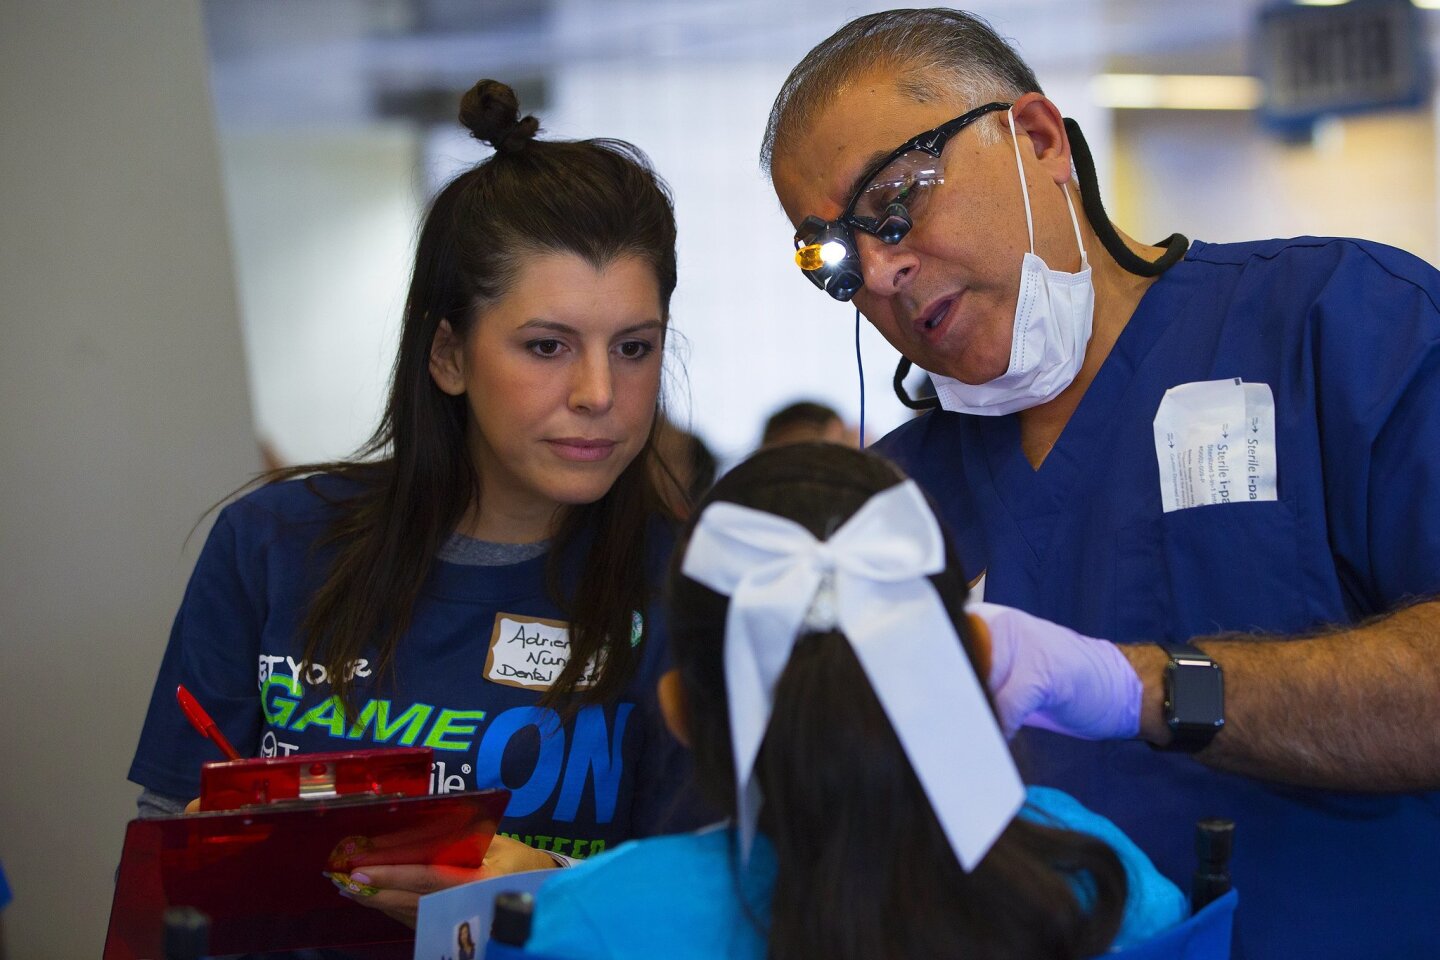 Dr. Mehran Raza and Adrian Nunes examine one of the 300 students that arrived to take part in the partnering of the San Diego Chargers and TeamSmile to provide a free dental clinic Tuesday at Qualcomm Stadium.